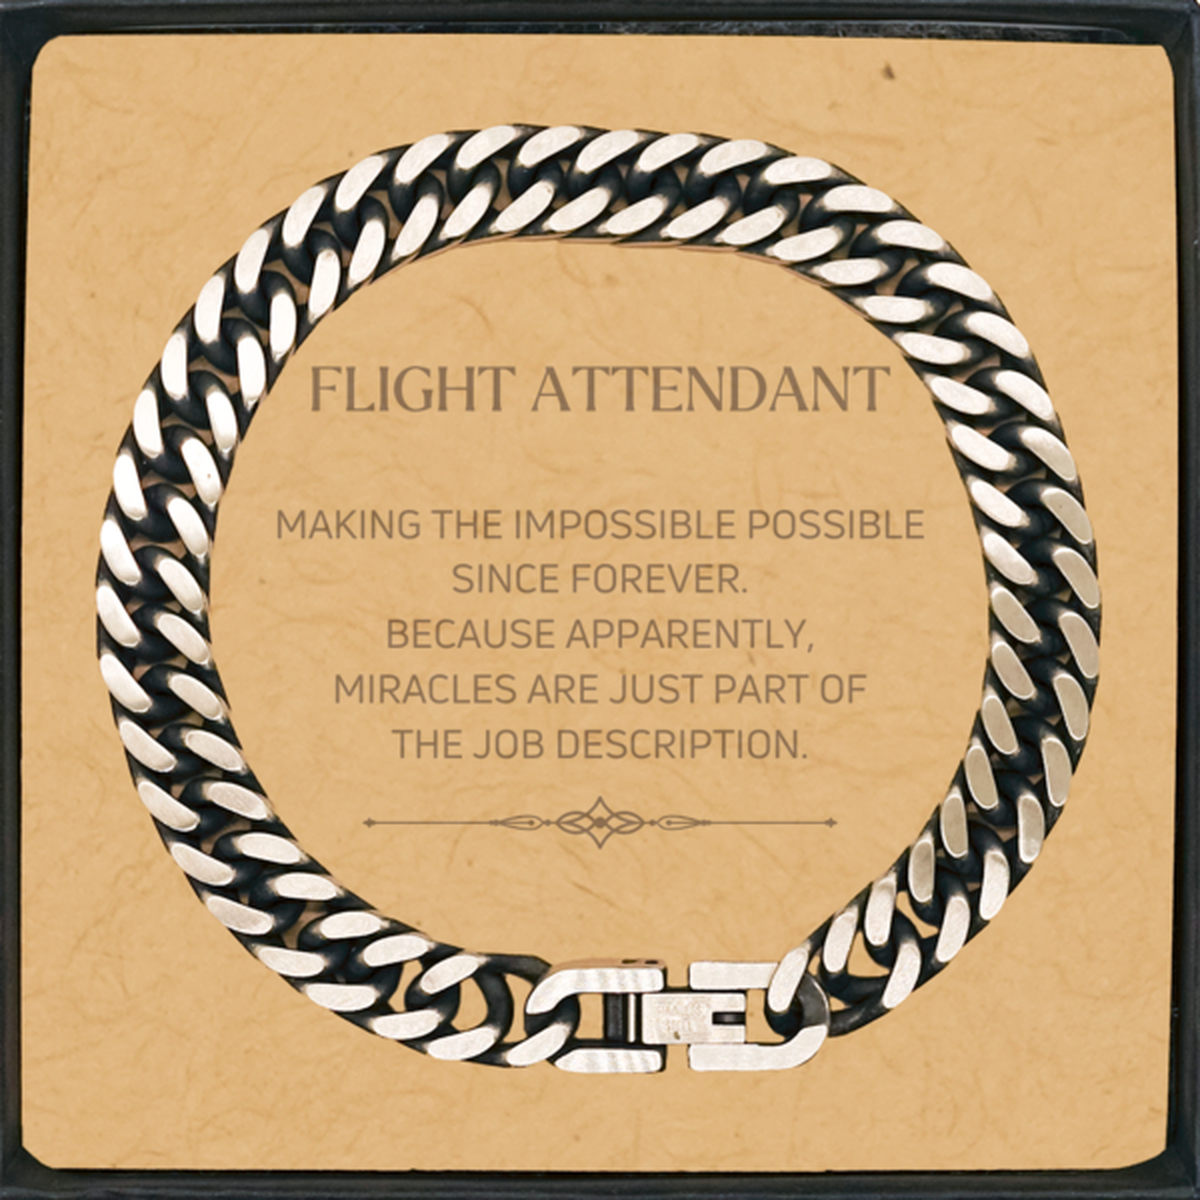 Funny Flight Attendant Gifts, Miracles are just part of the job description, Inspirational Birthday Cuban Link Chain Bracelet For Flight Attendant, Men, Women, Coworkers, Friends, Boss